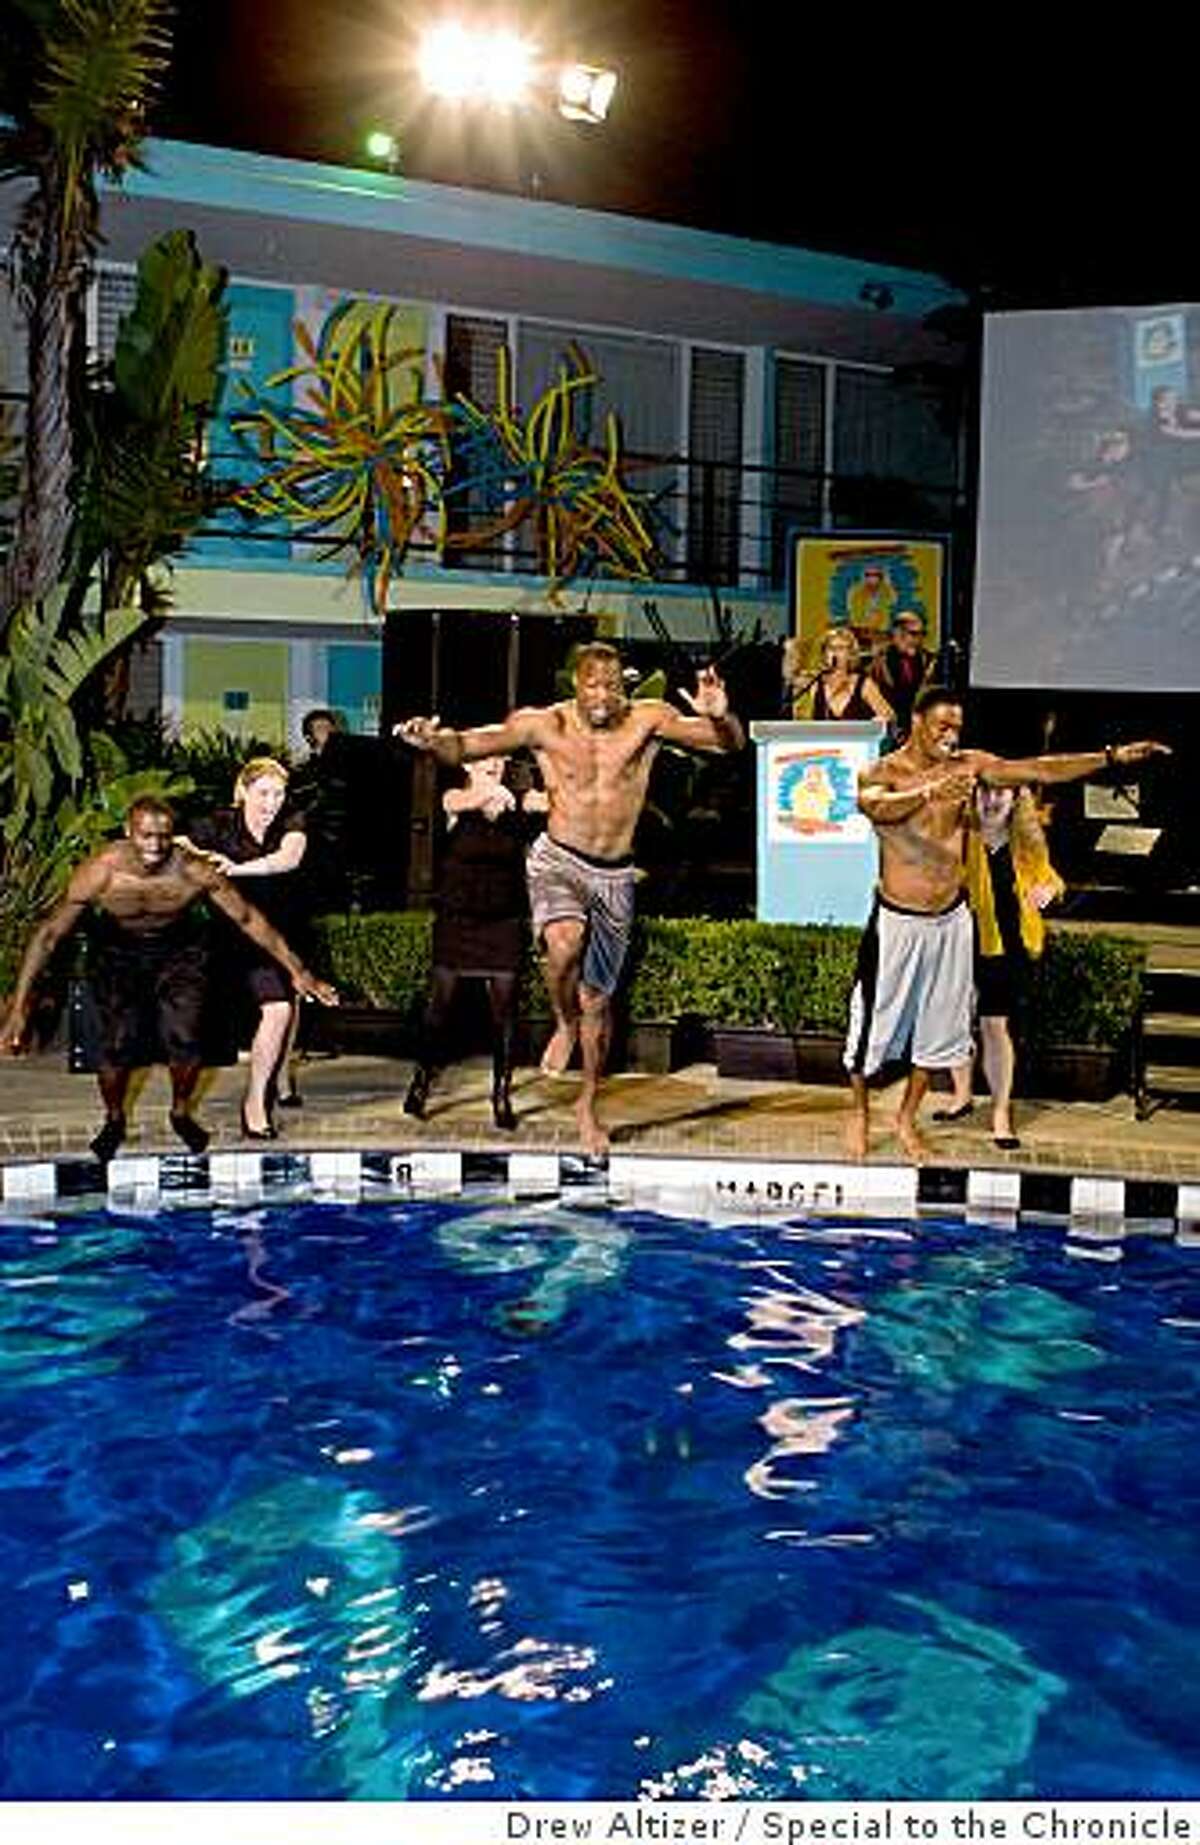 The 2008 TNDC Celebrity Pool Toss featured celebrities being tossed into the Phoenix Hotel pool to raise money for Tenderloin kids and families. Arman Shields, John Bowie, Manny Lawson (Pool Toss)